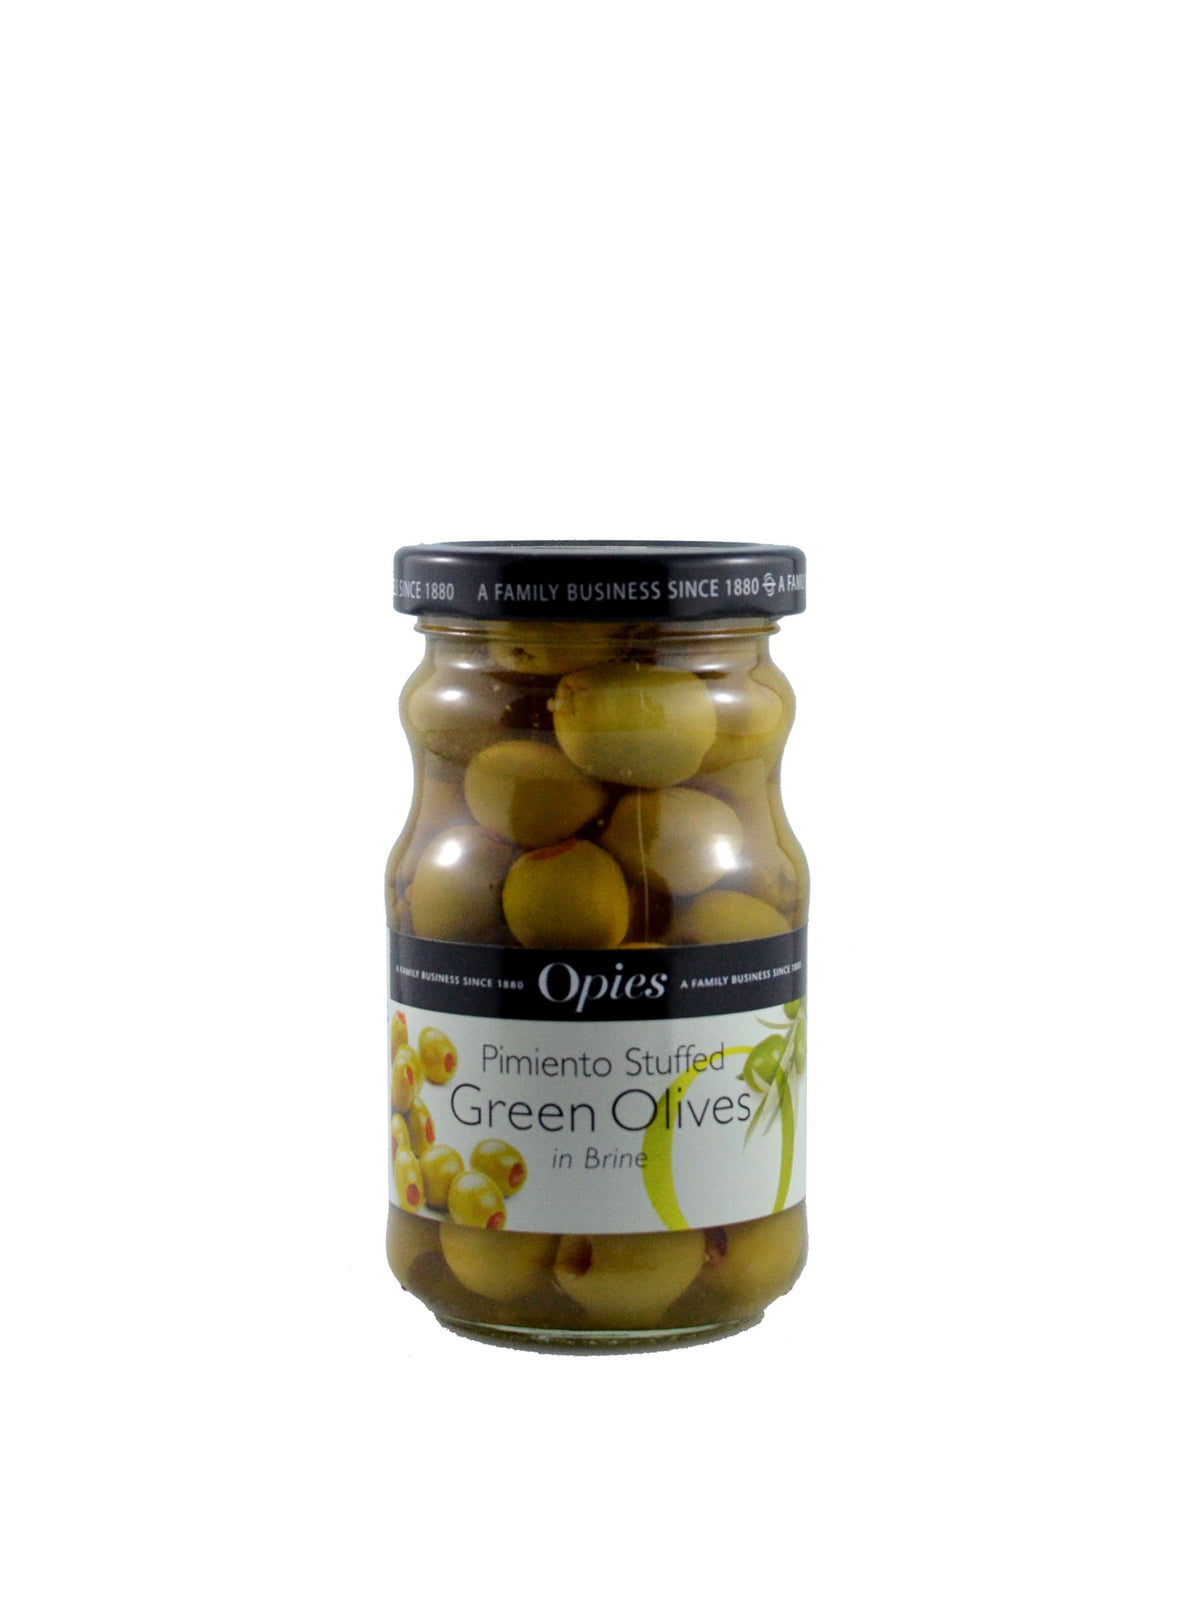 Opies Pimento Stuffed Green Olives in Brine